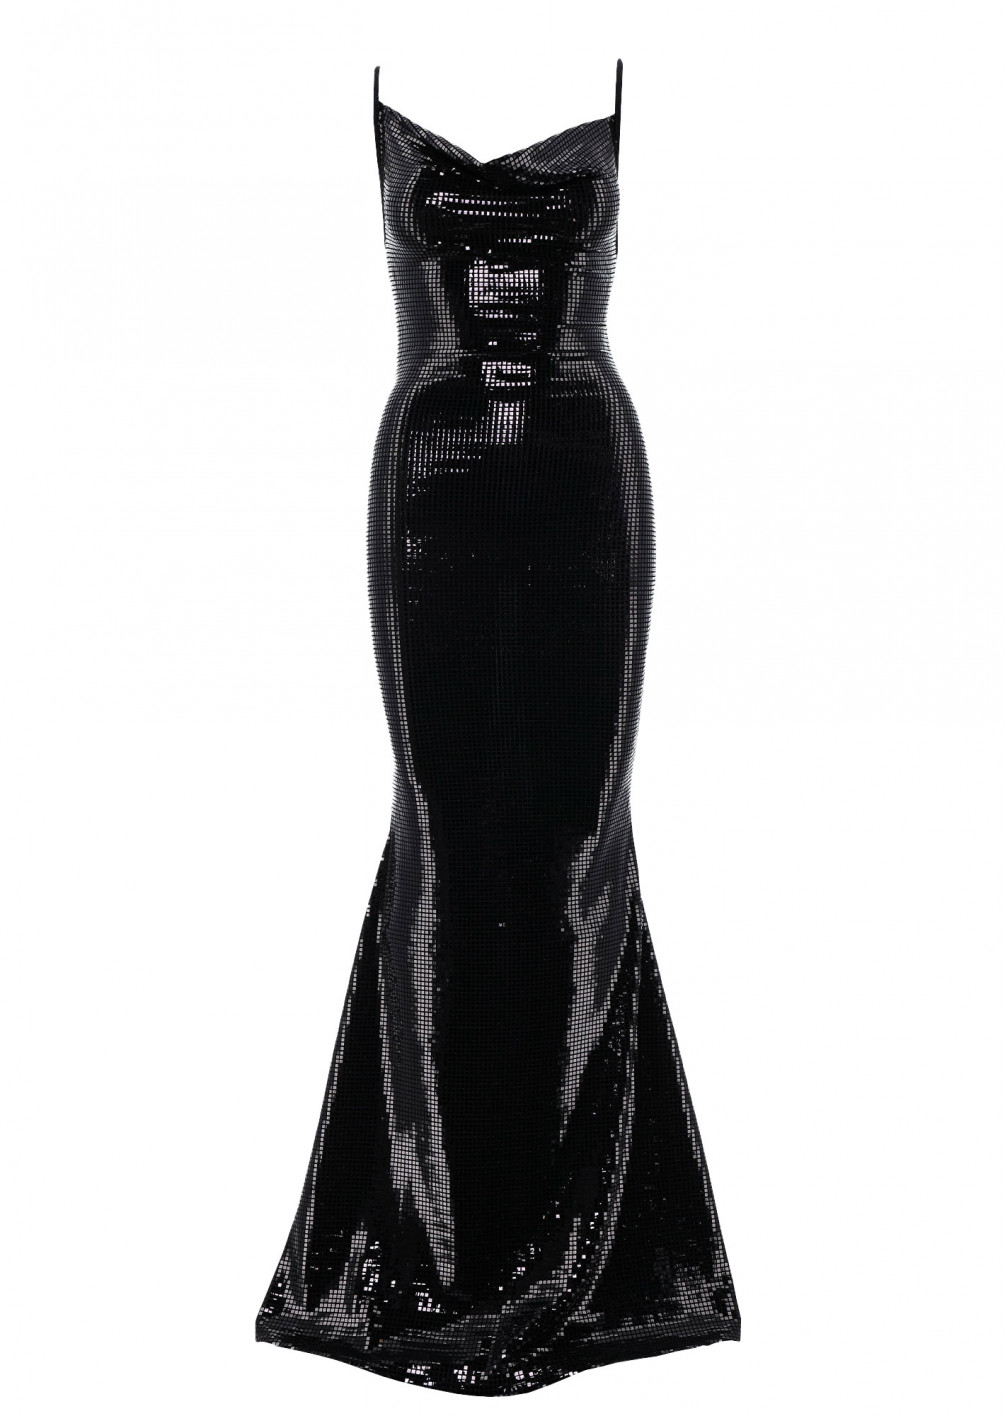 ARUT Slipp Long Gown in Black | THE-PRIVATE-LABEL.COM